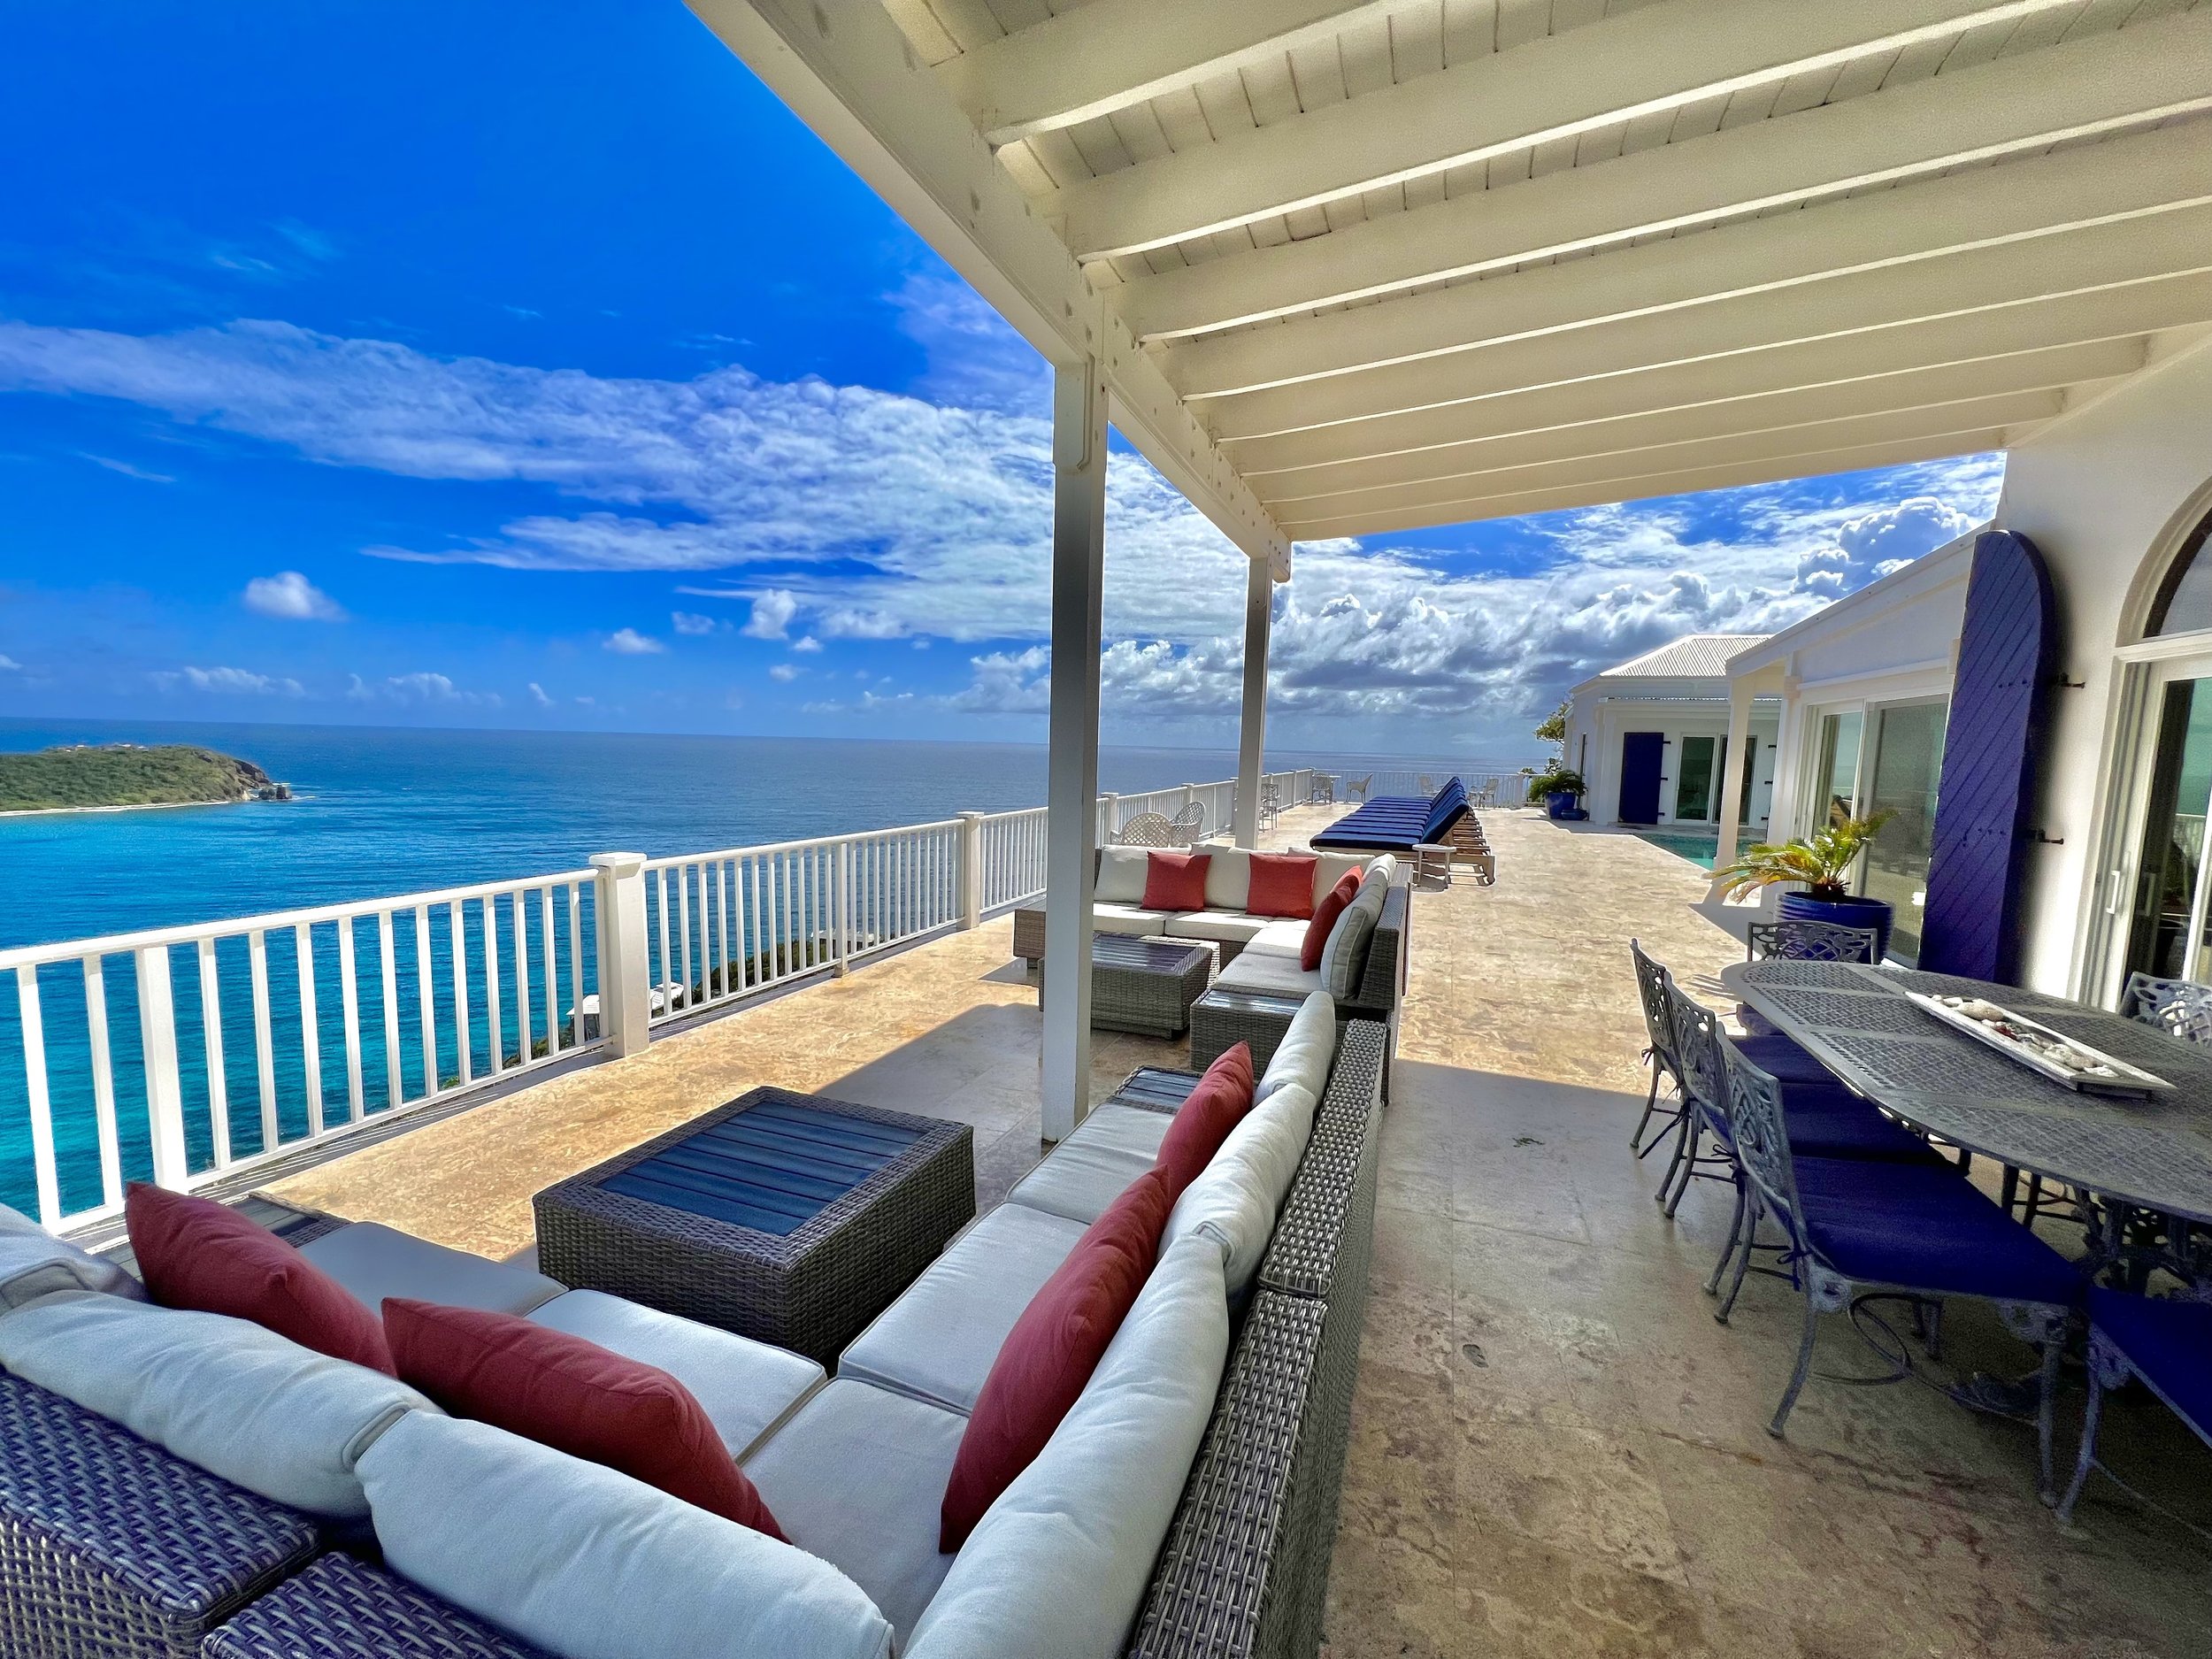 Take in the big blue views from the covered porch are or the loung chairs.jpg